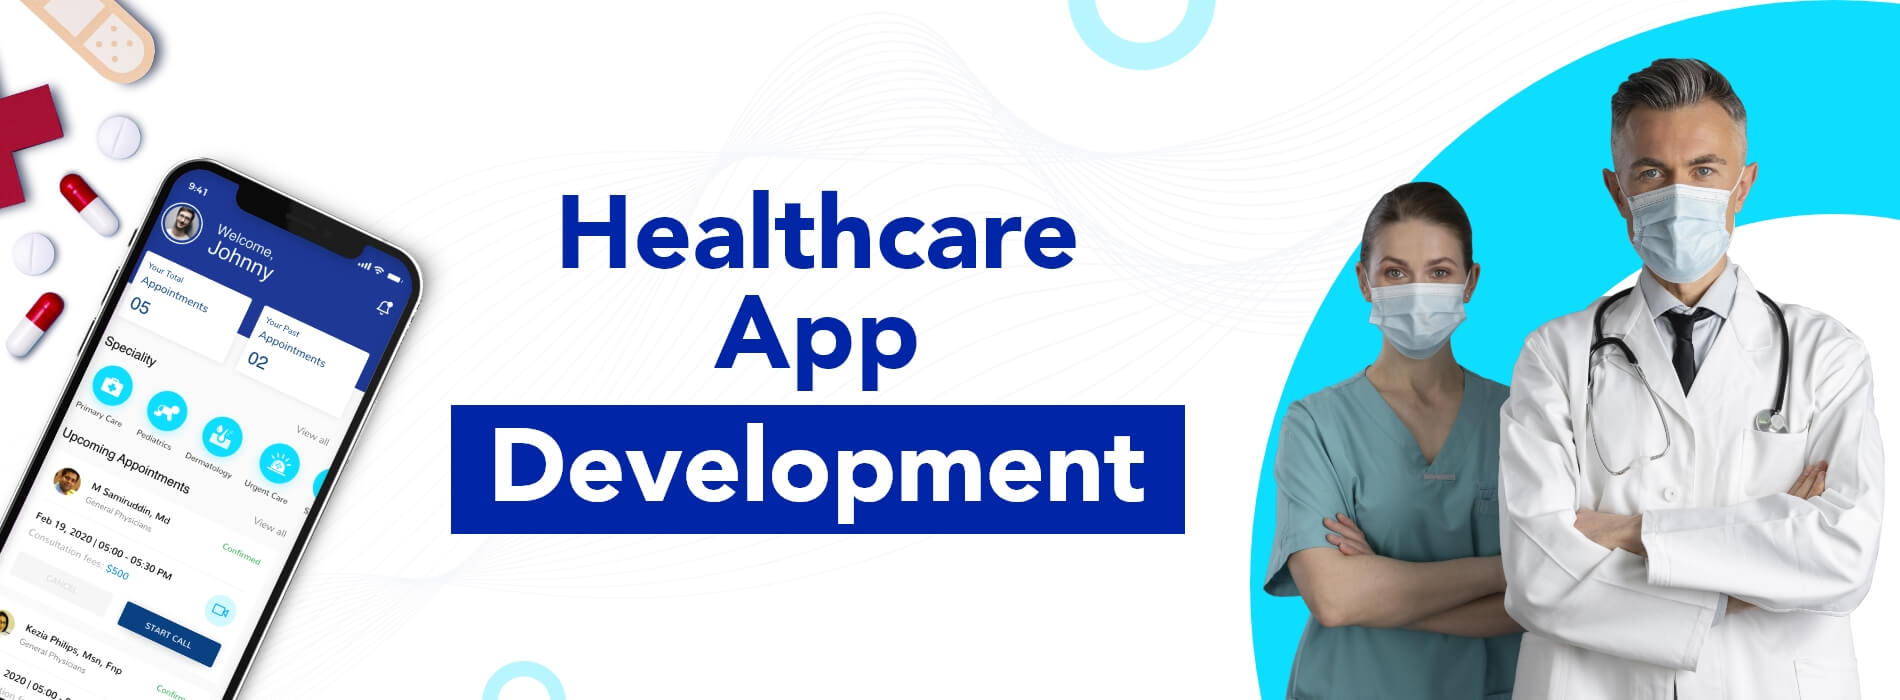 Mobile Health App Development: Types, Features, Costs & More